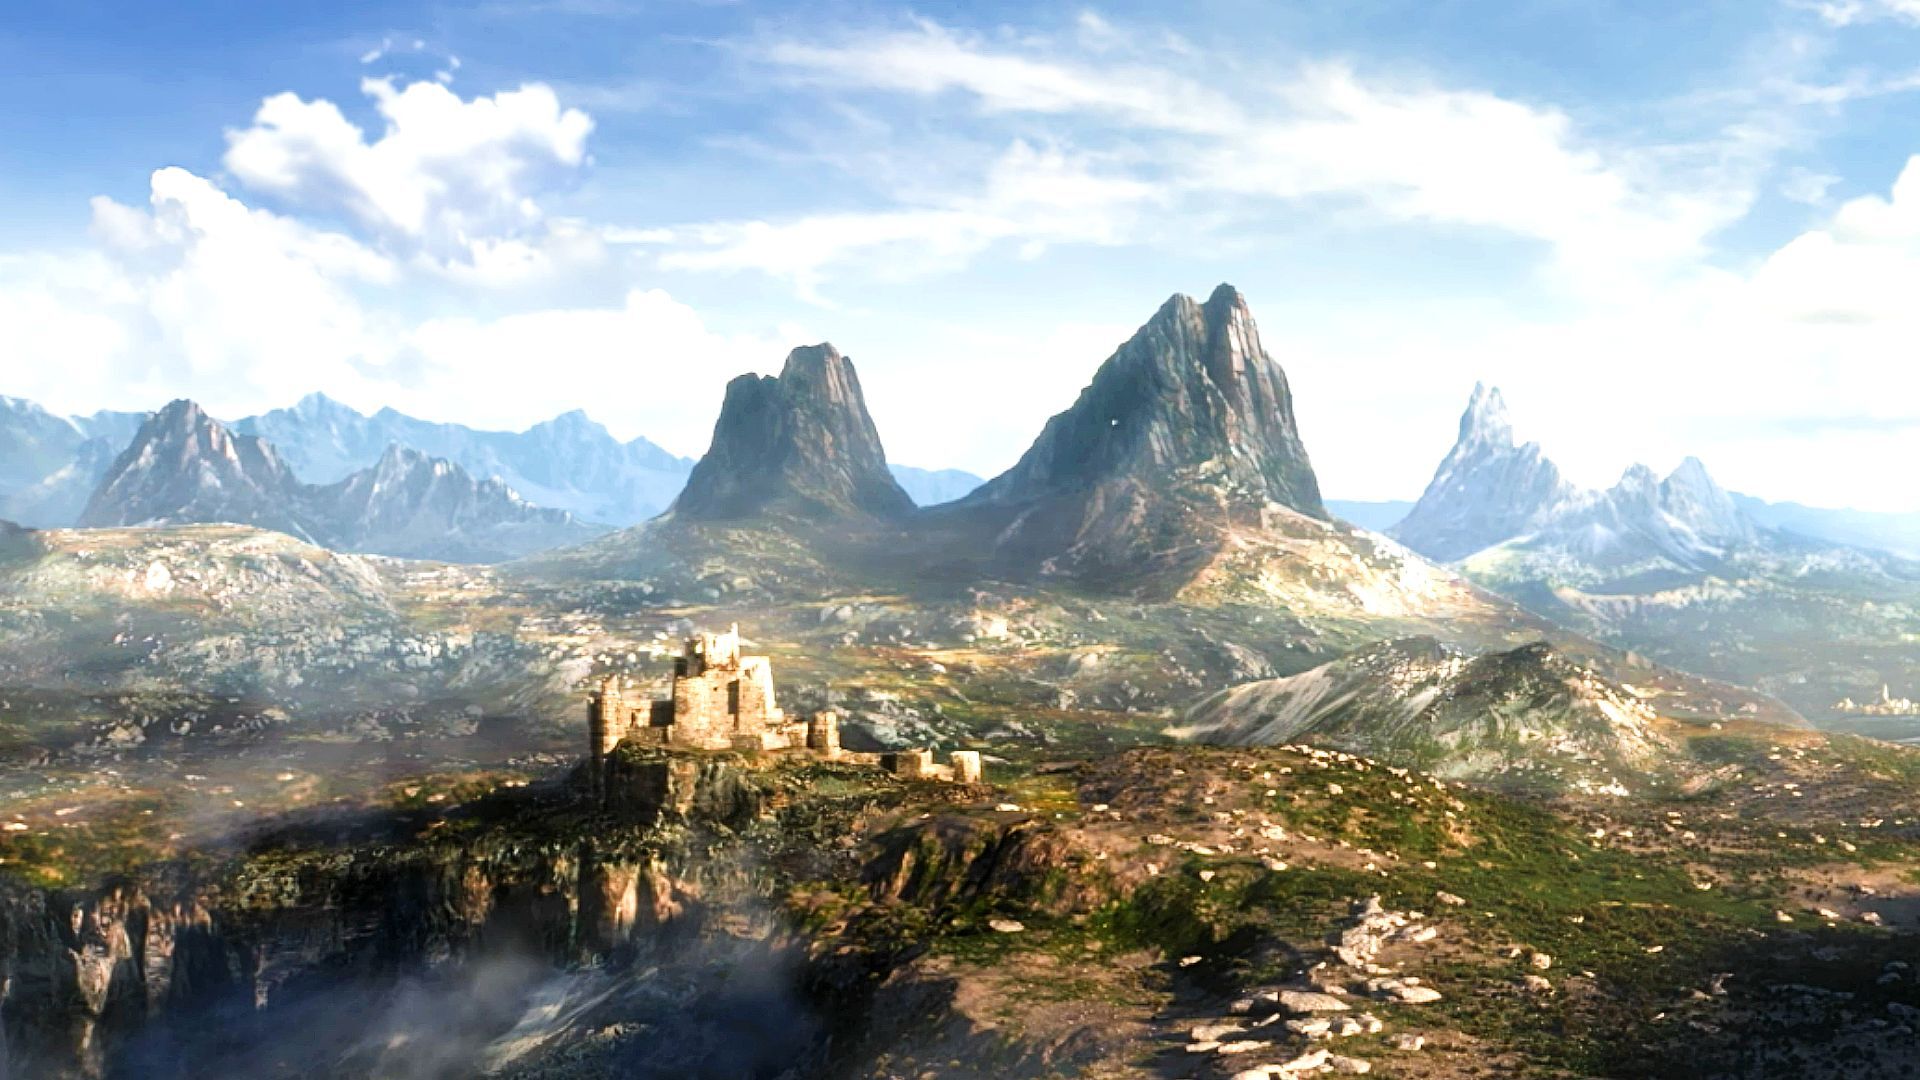 Have They Not Even Started?” – Fans Stunned Knowing Elder Scrolls 6 Is  Still 5–6 Years Away - EssentiallySports